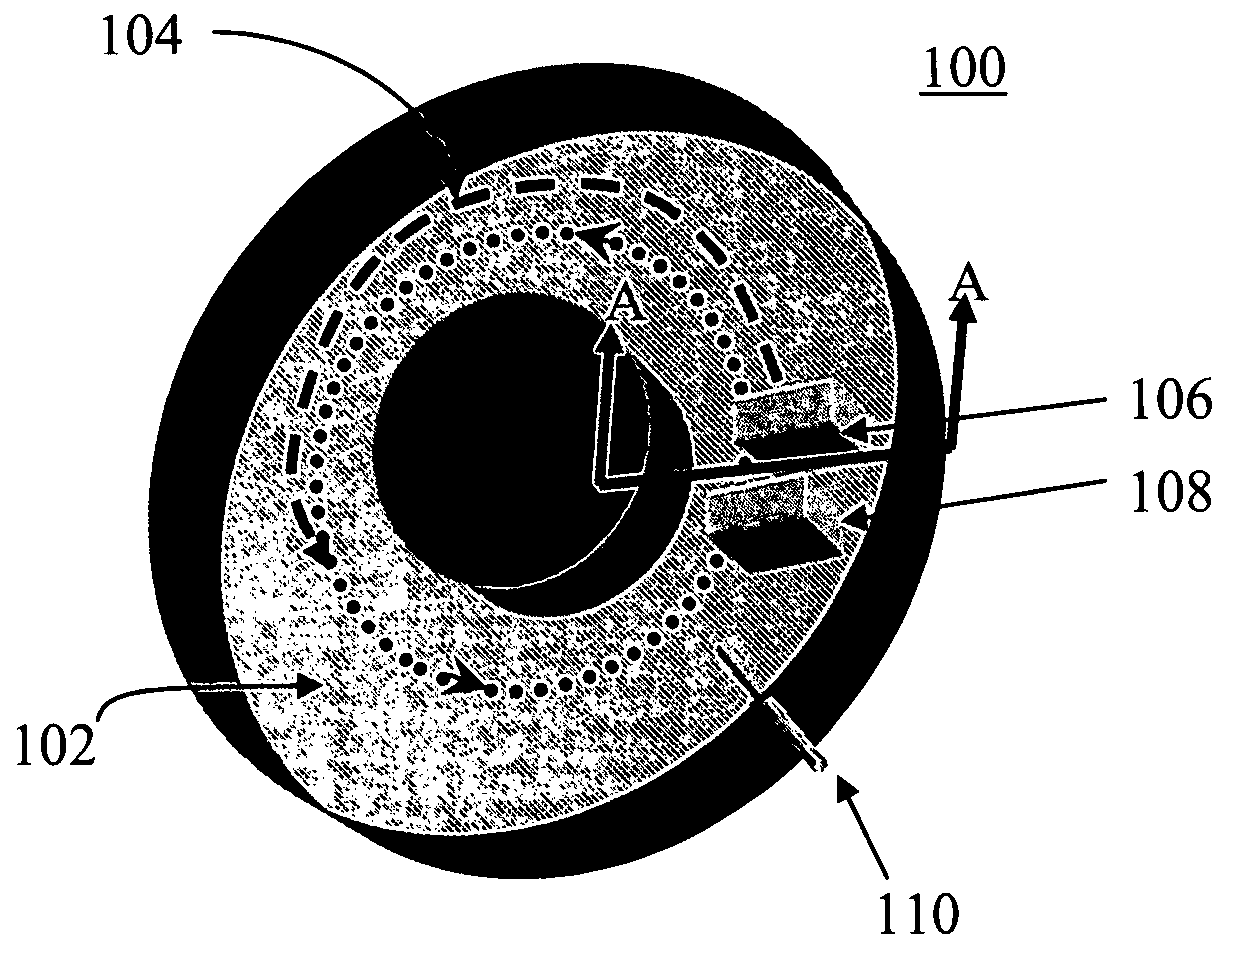 Methods of constructing a betatron vacuum chamber and injector